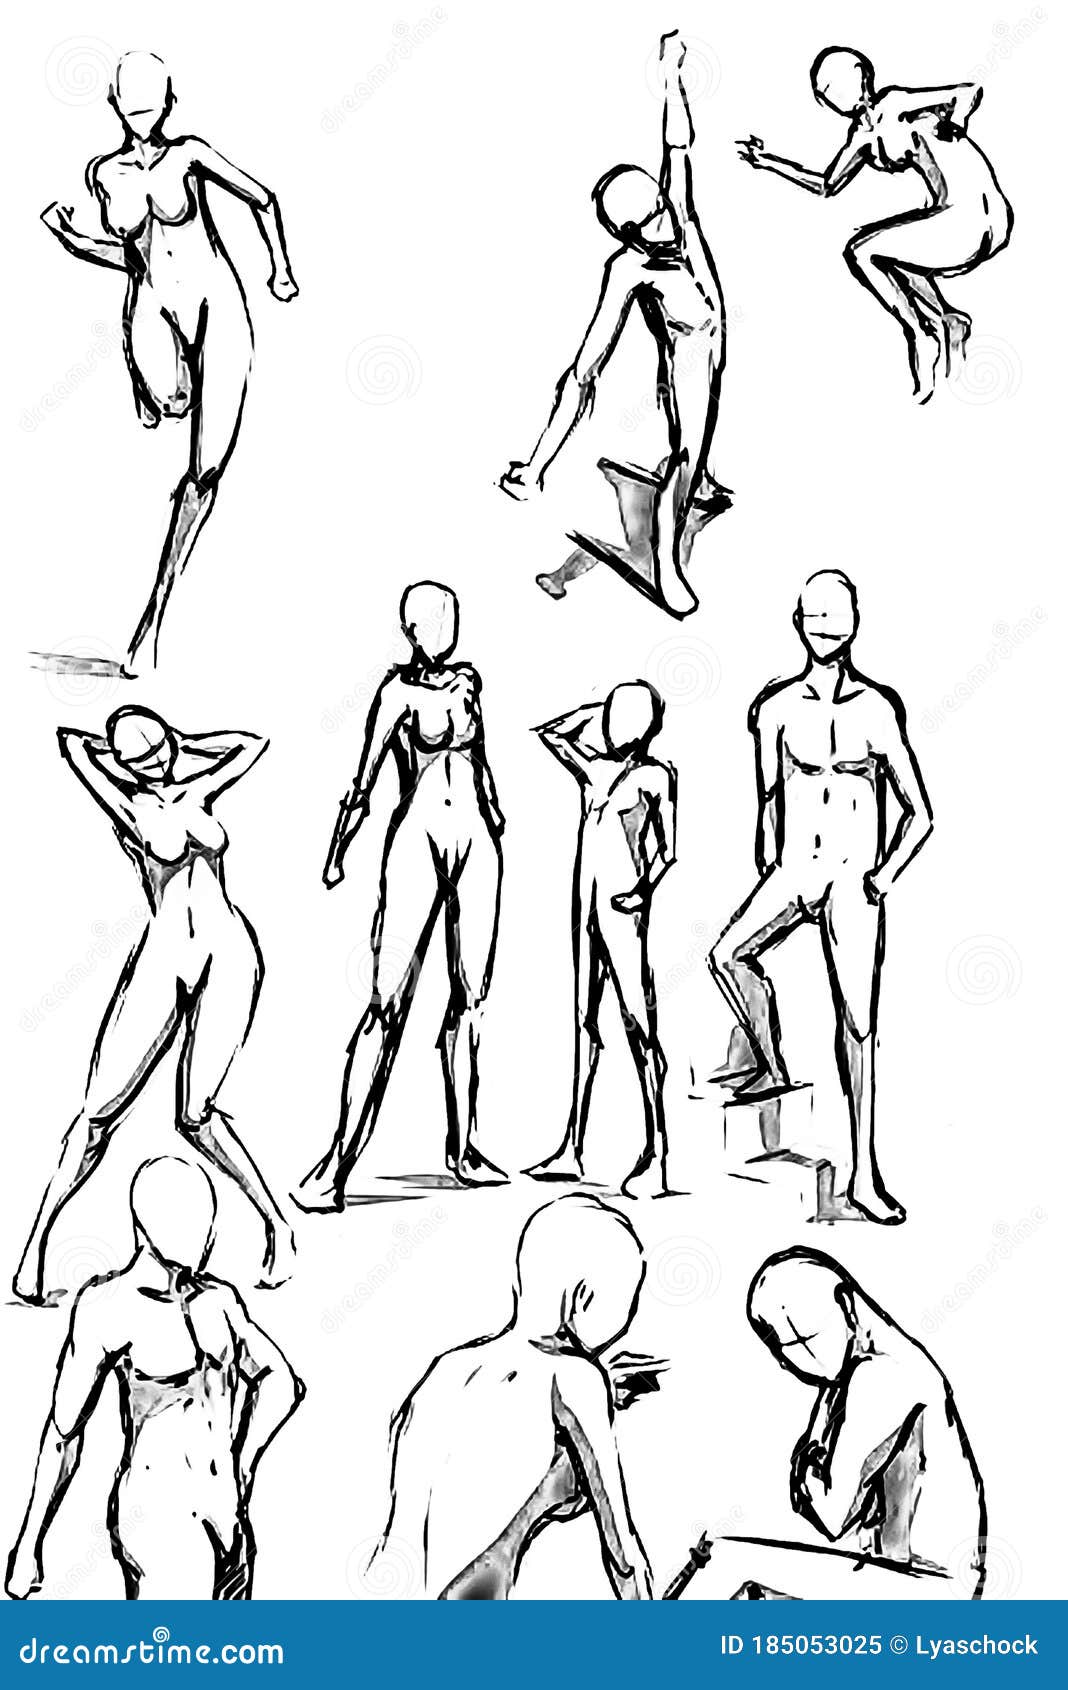 Drawing Poses Body References  HowtoArtcom